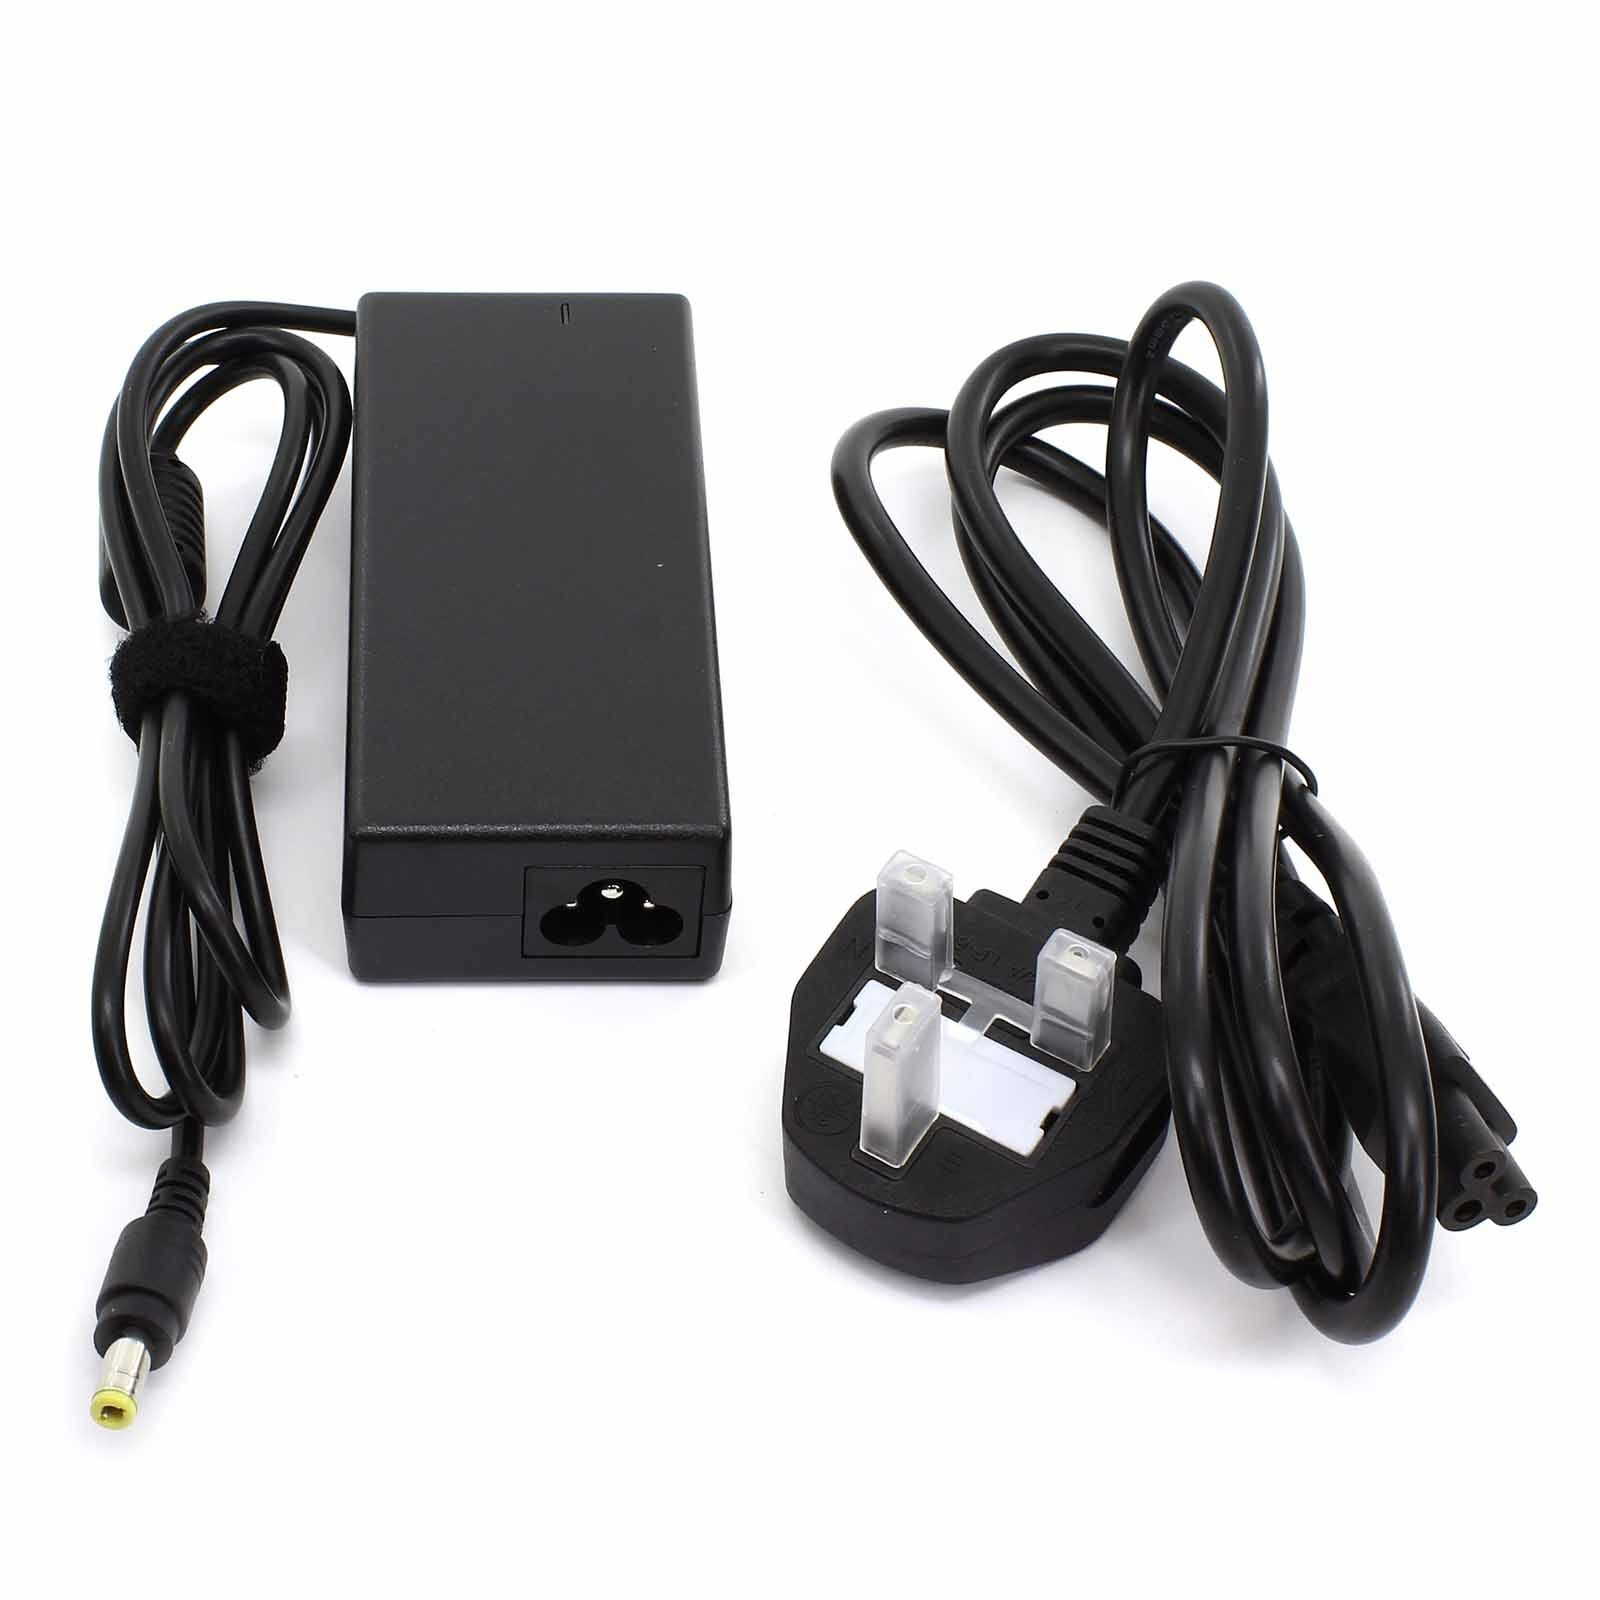 APD DA-34A02 AC Adapter For Asian Power Devices 5Vdc 2A 12Vdc 2A Power Supply Cor